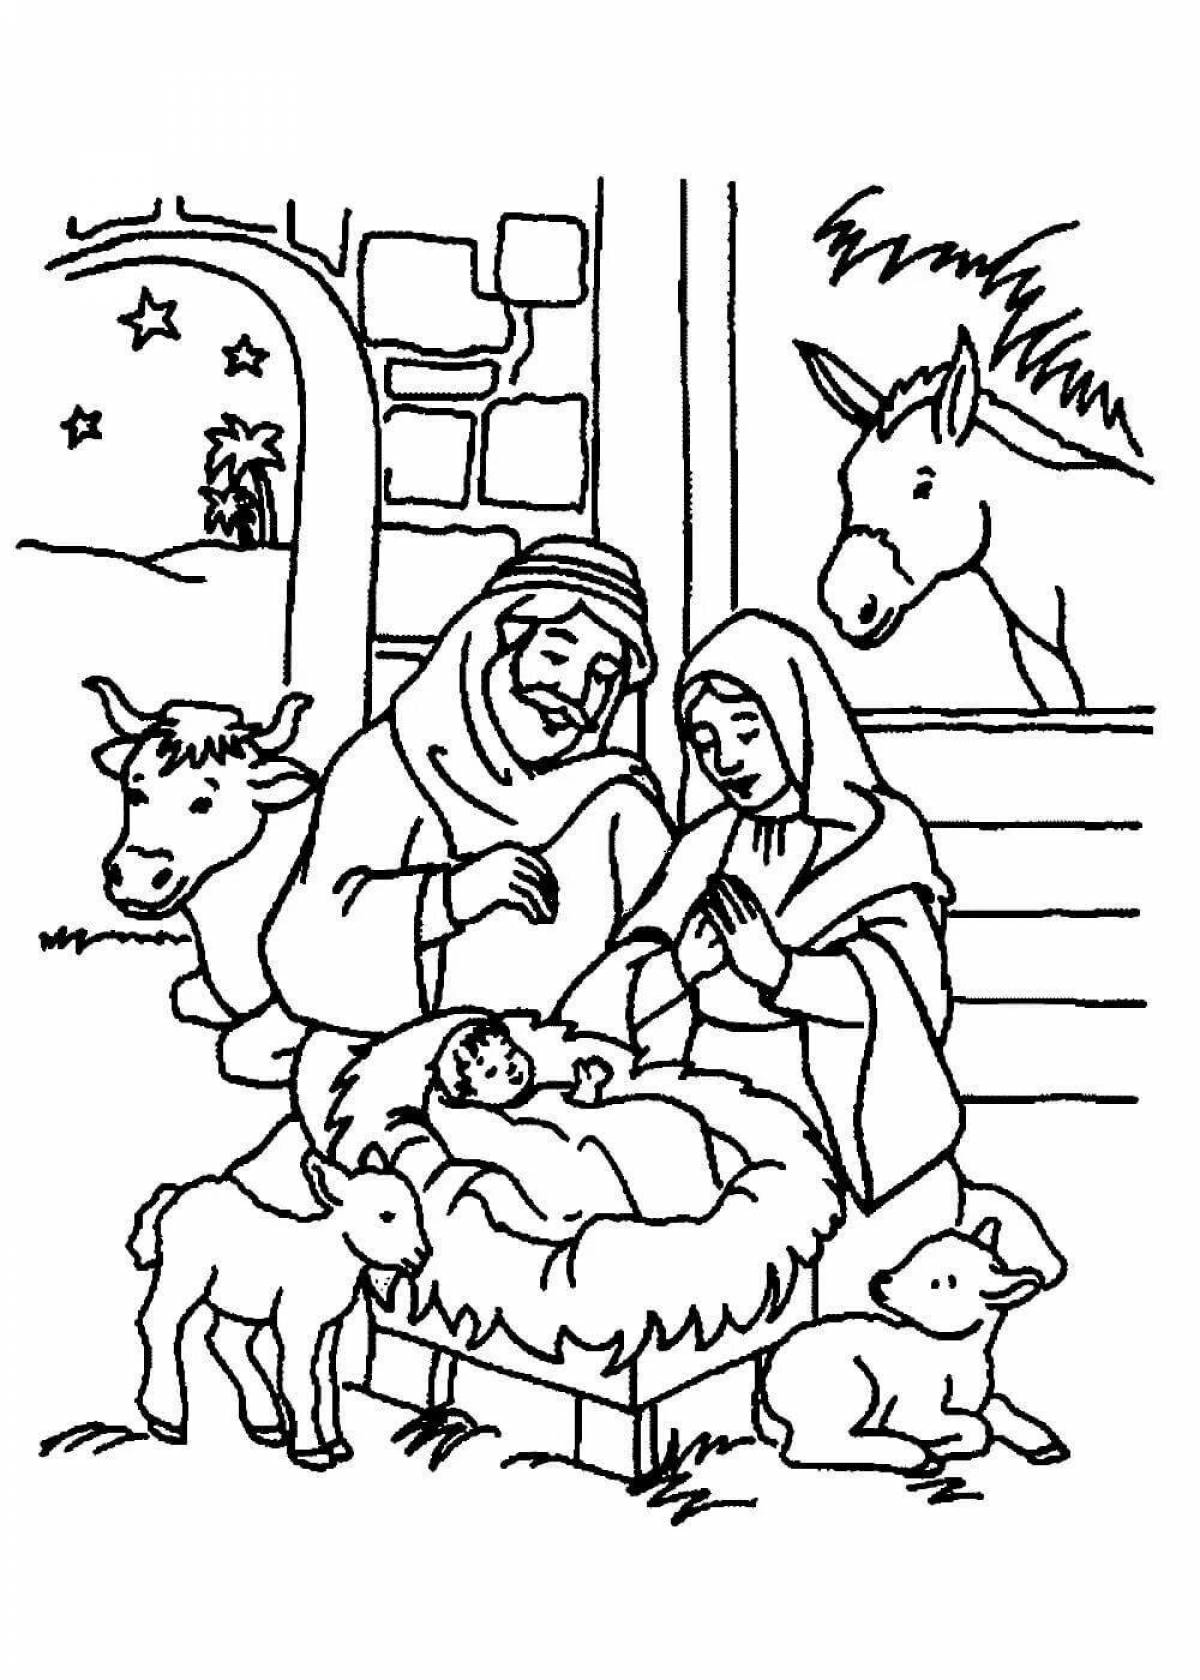 Bright Christmas coloring book for 5-6 year olds